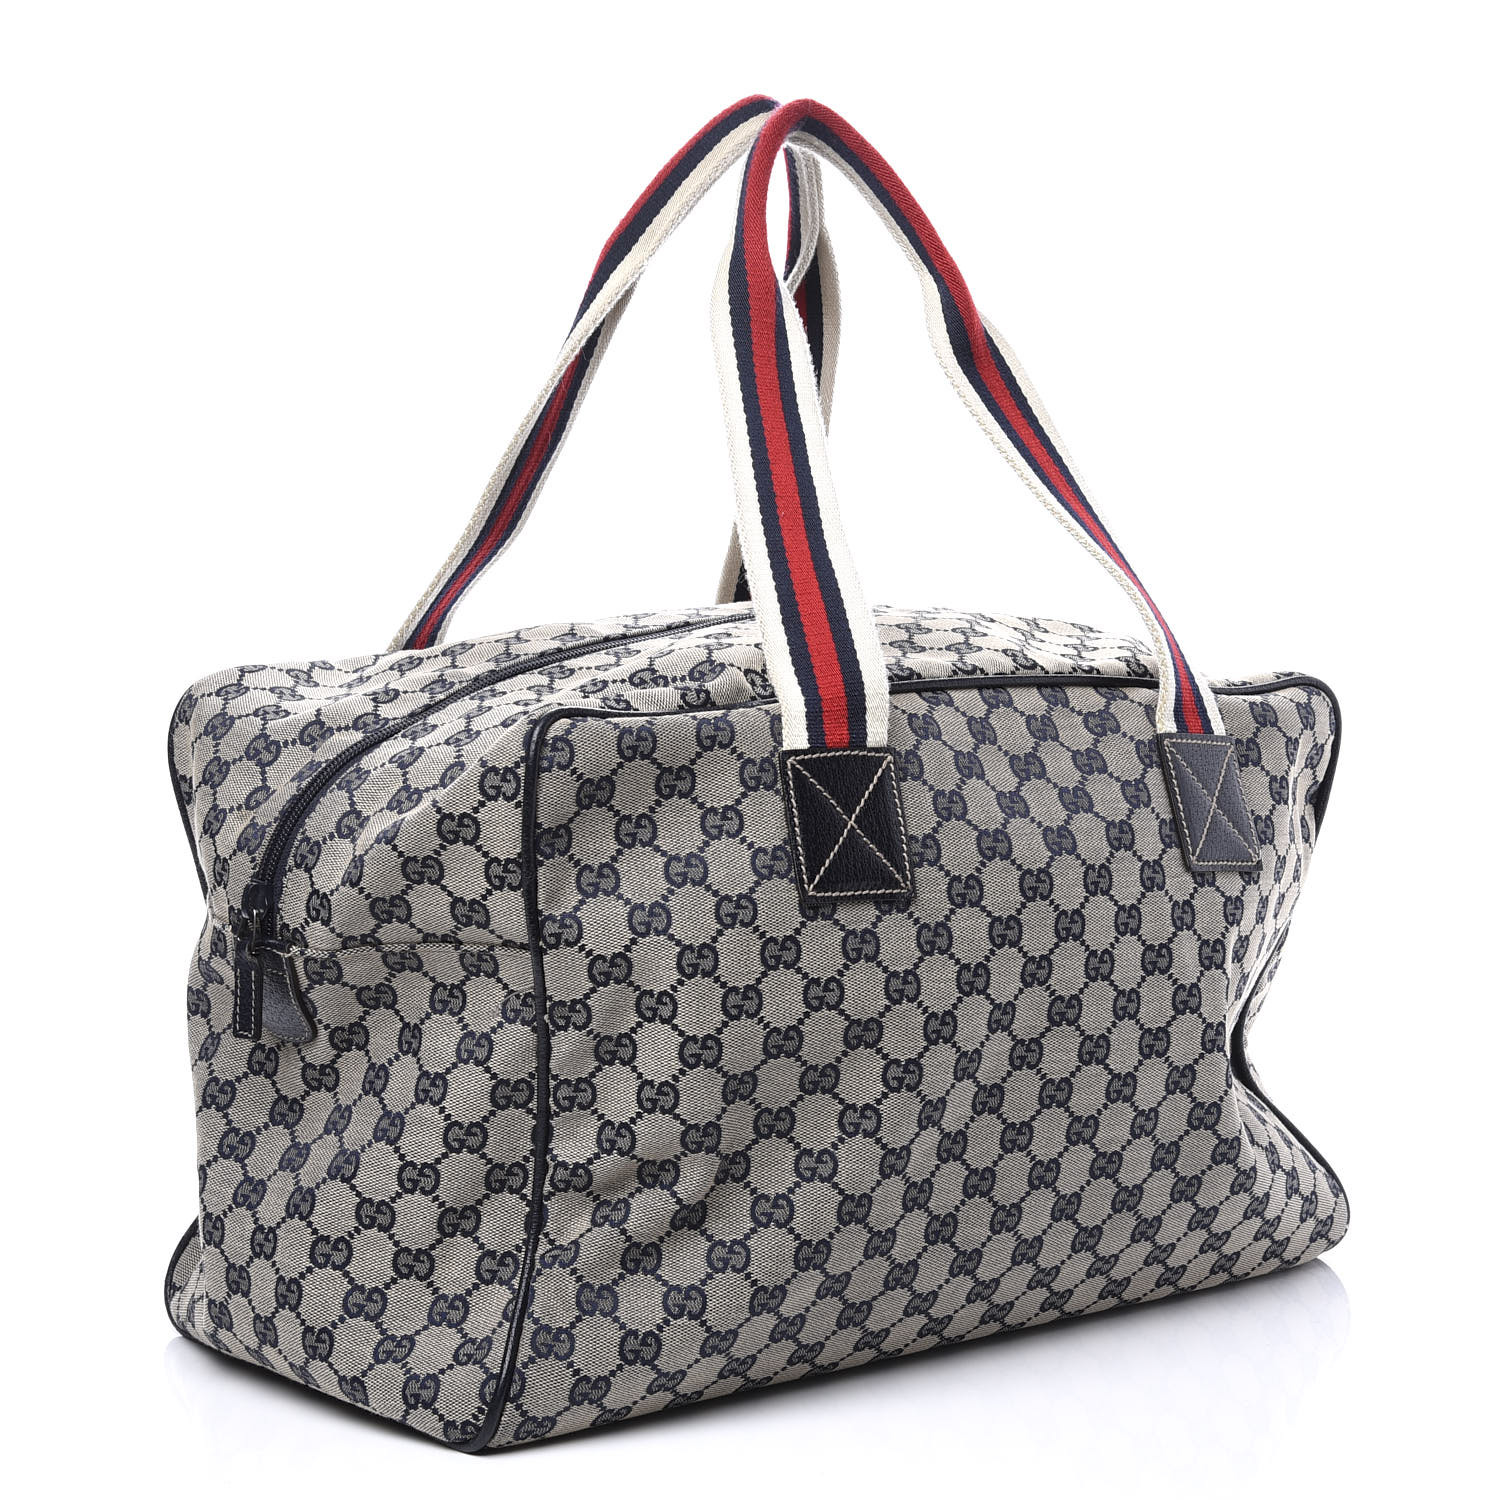 GUCCI Monogram Large Web Carry On Duffle Bag Navy Blue 569691